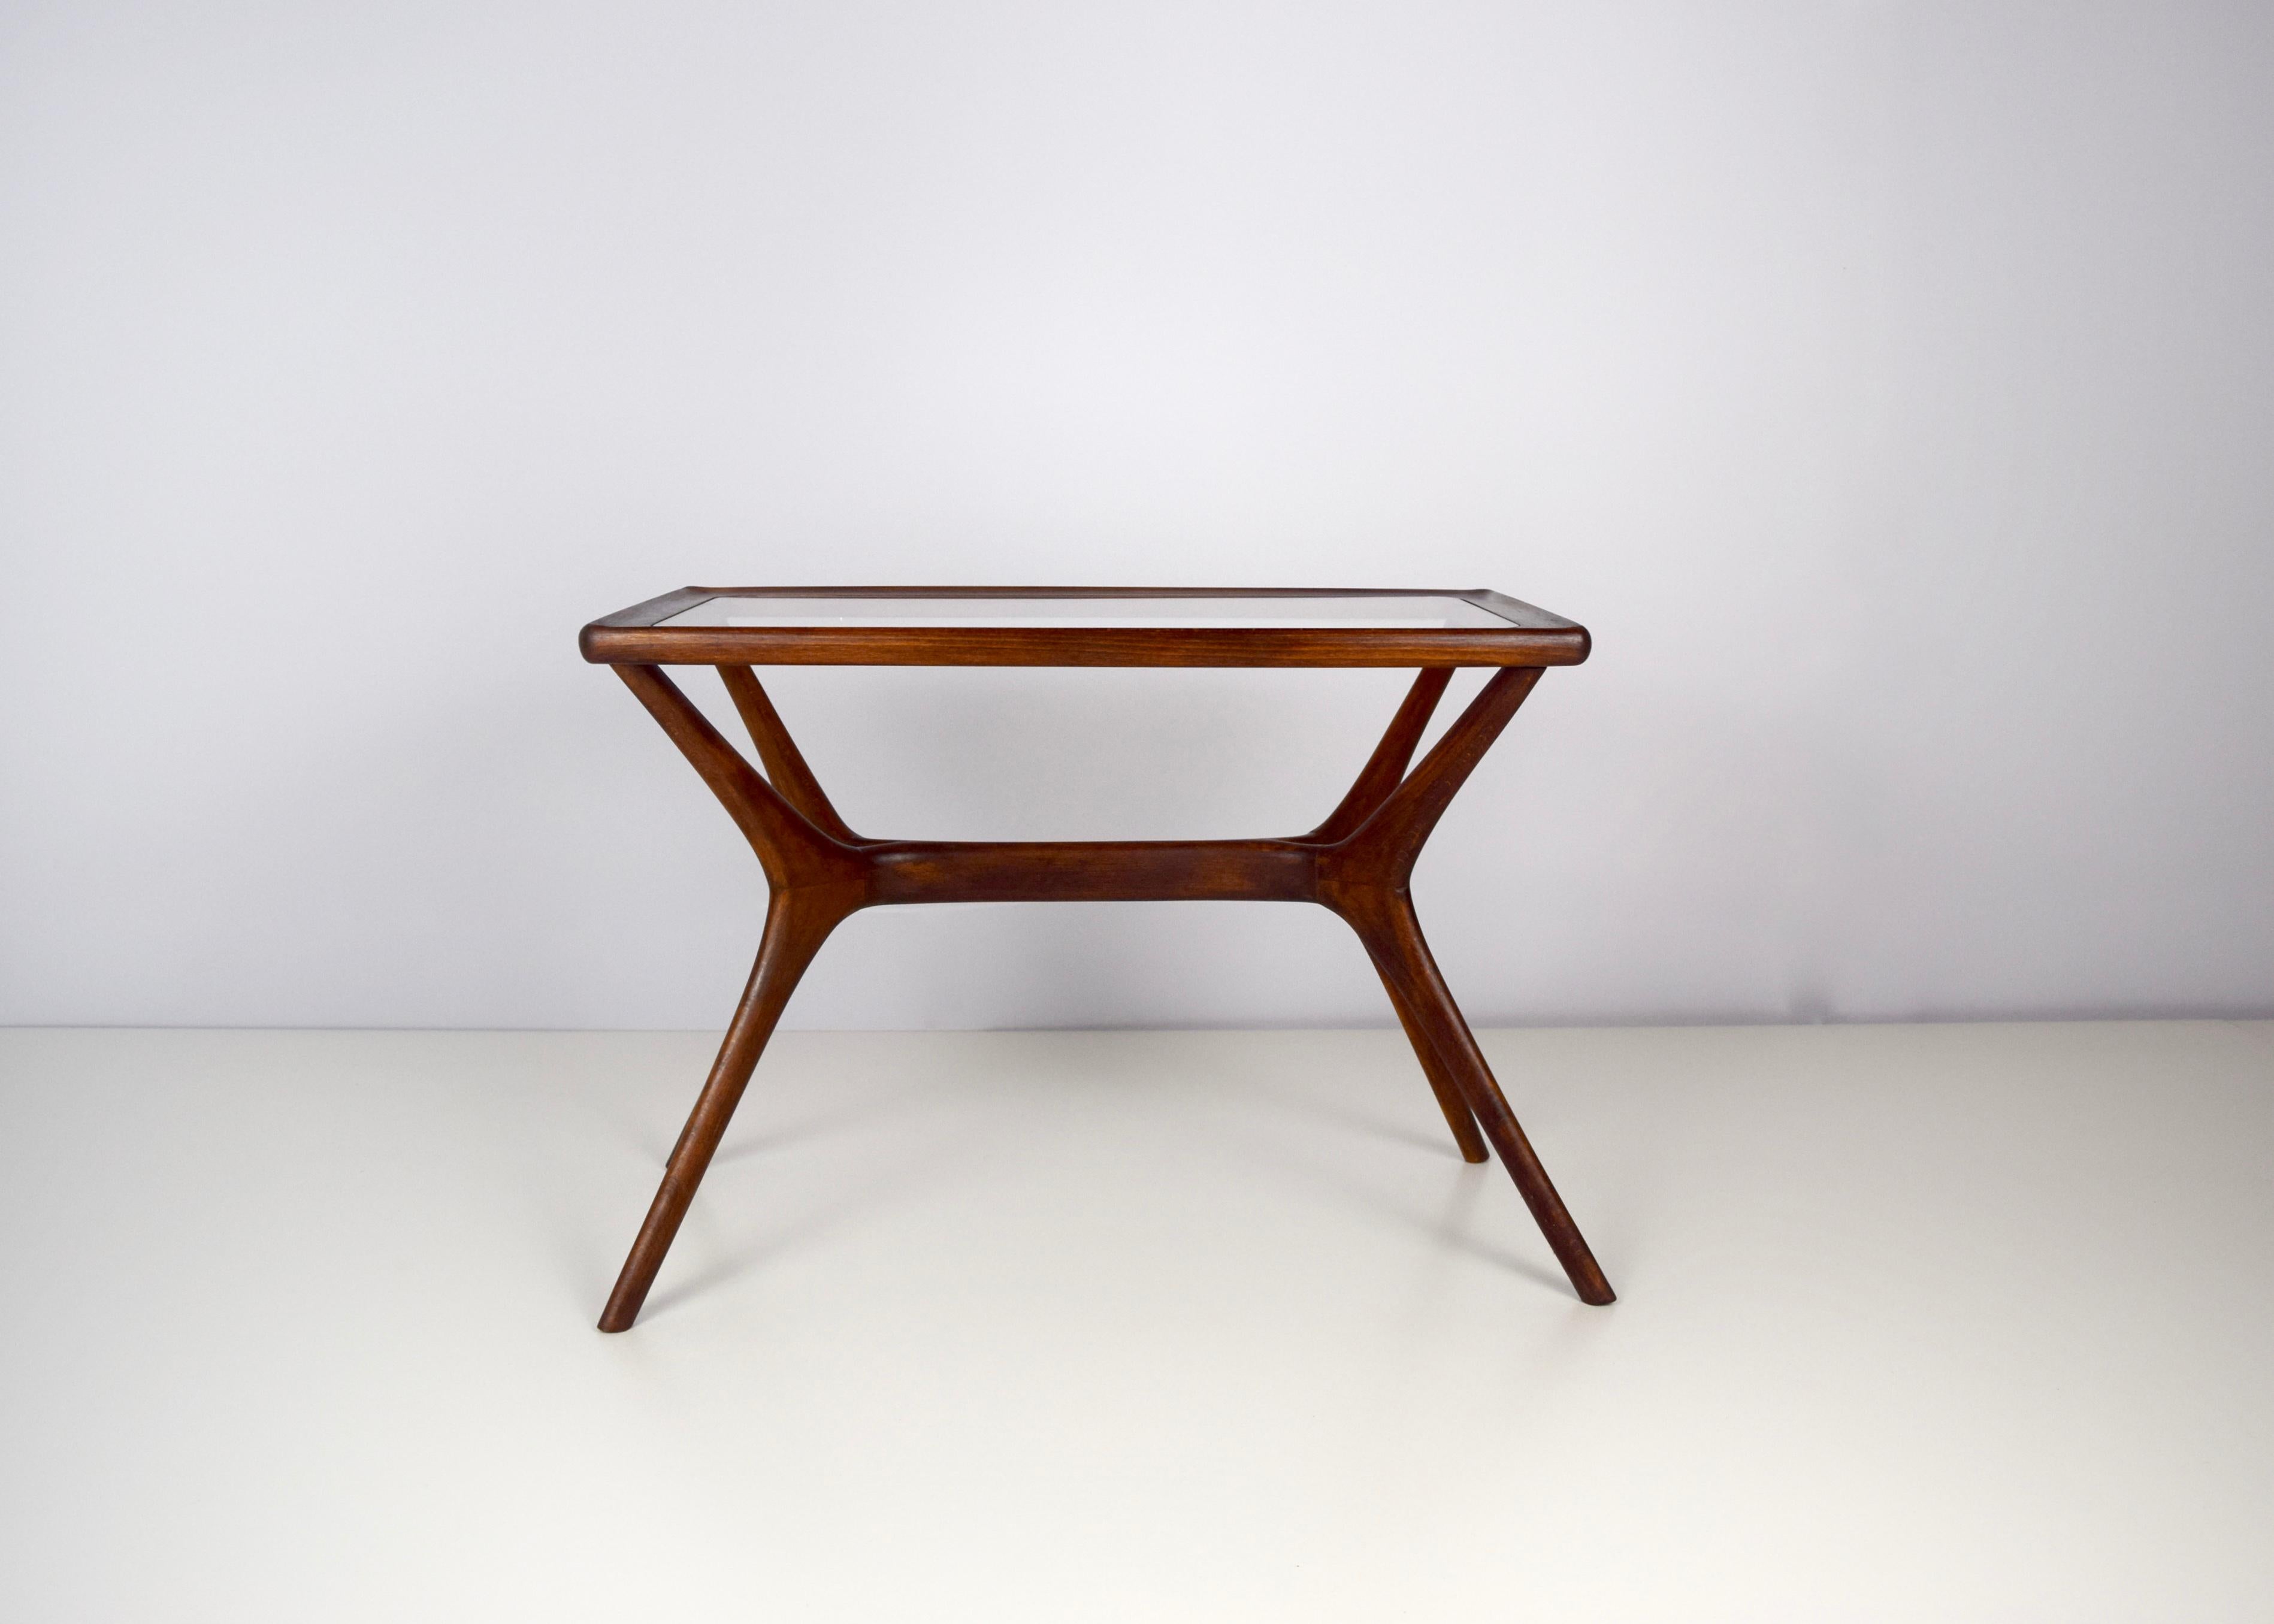 Beautiful original Italian midcentury design table from the 1950s, made of massive wood. It is in great condition, absolutely a top piece which elegantly fits with any style given its timeless design.

The table is 67.5 cm width, 37 cm deep and